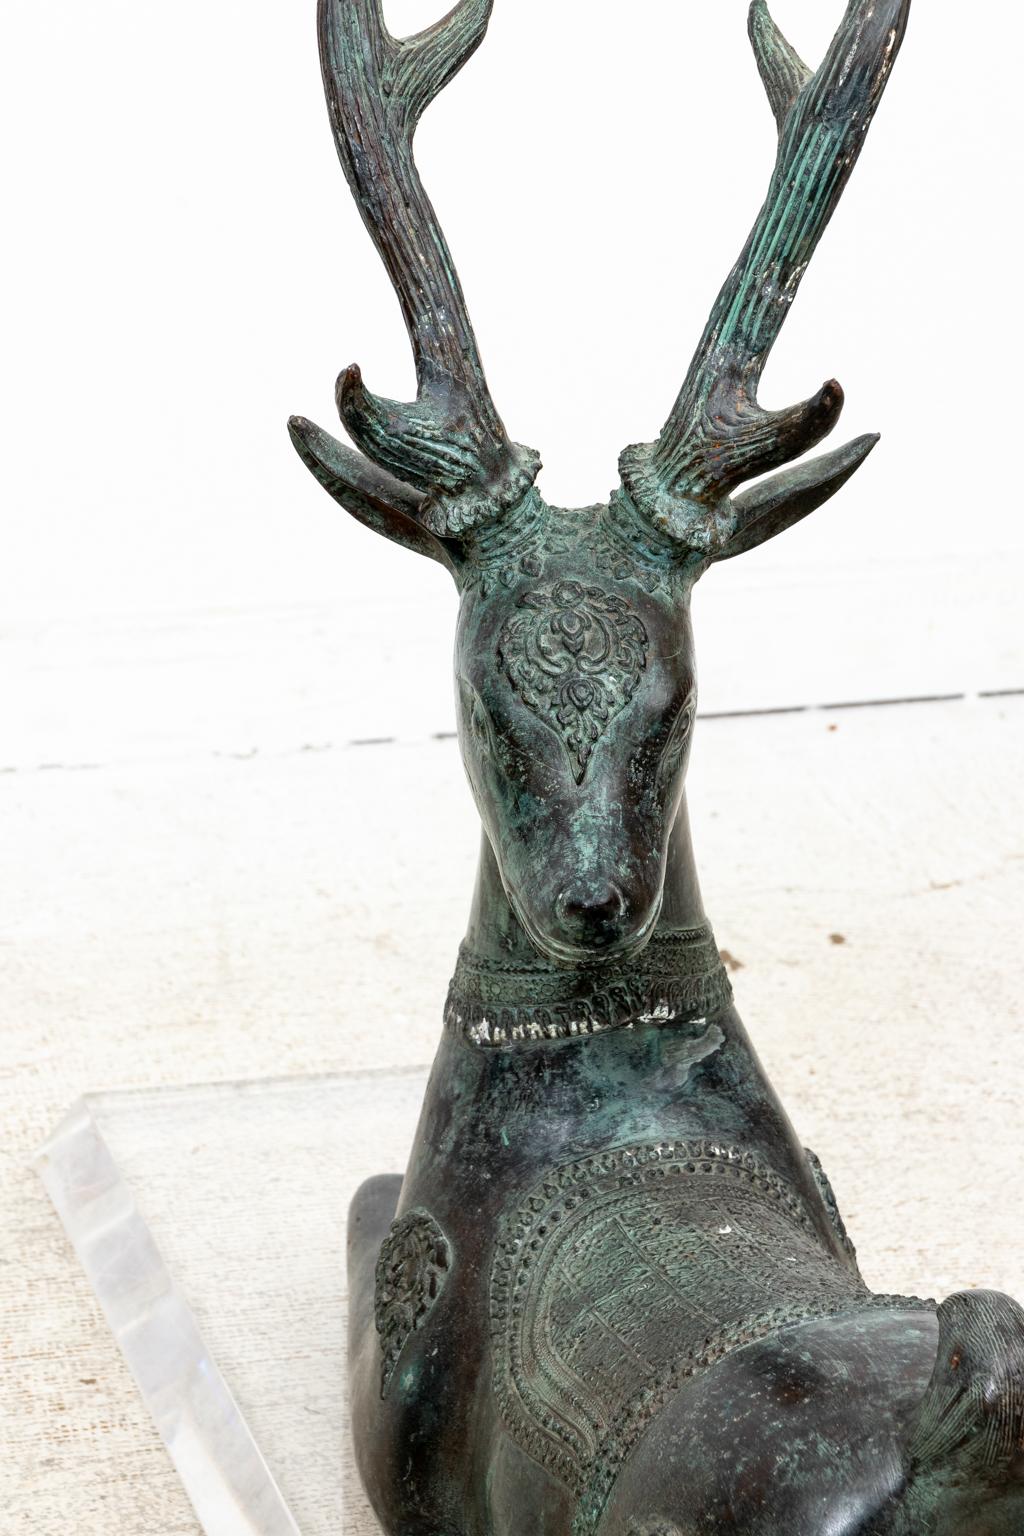 Circa mid-20th century detailed patinated bronze reclining deer sculpture on lucite base with high quality construction in the style of Sarried or The Rudolph Collection. Very good vintage condition with slight scratching on lucite base consistent